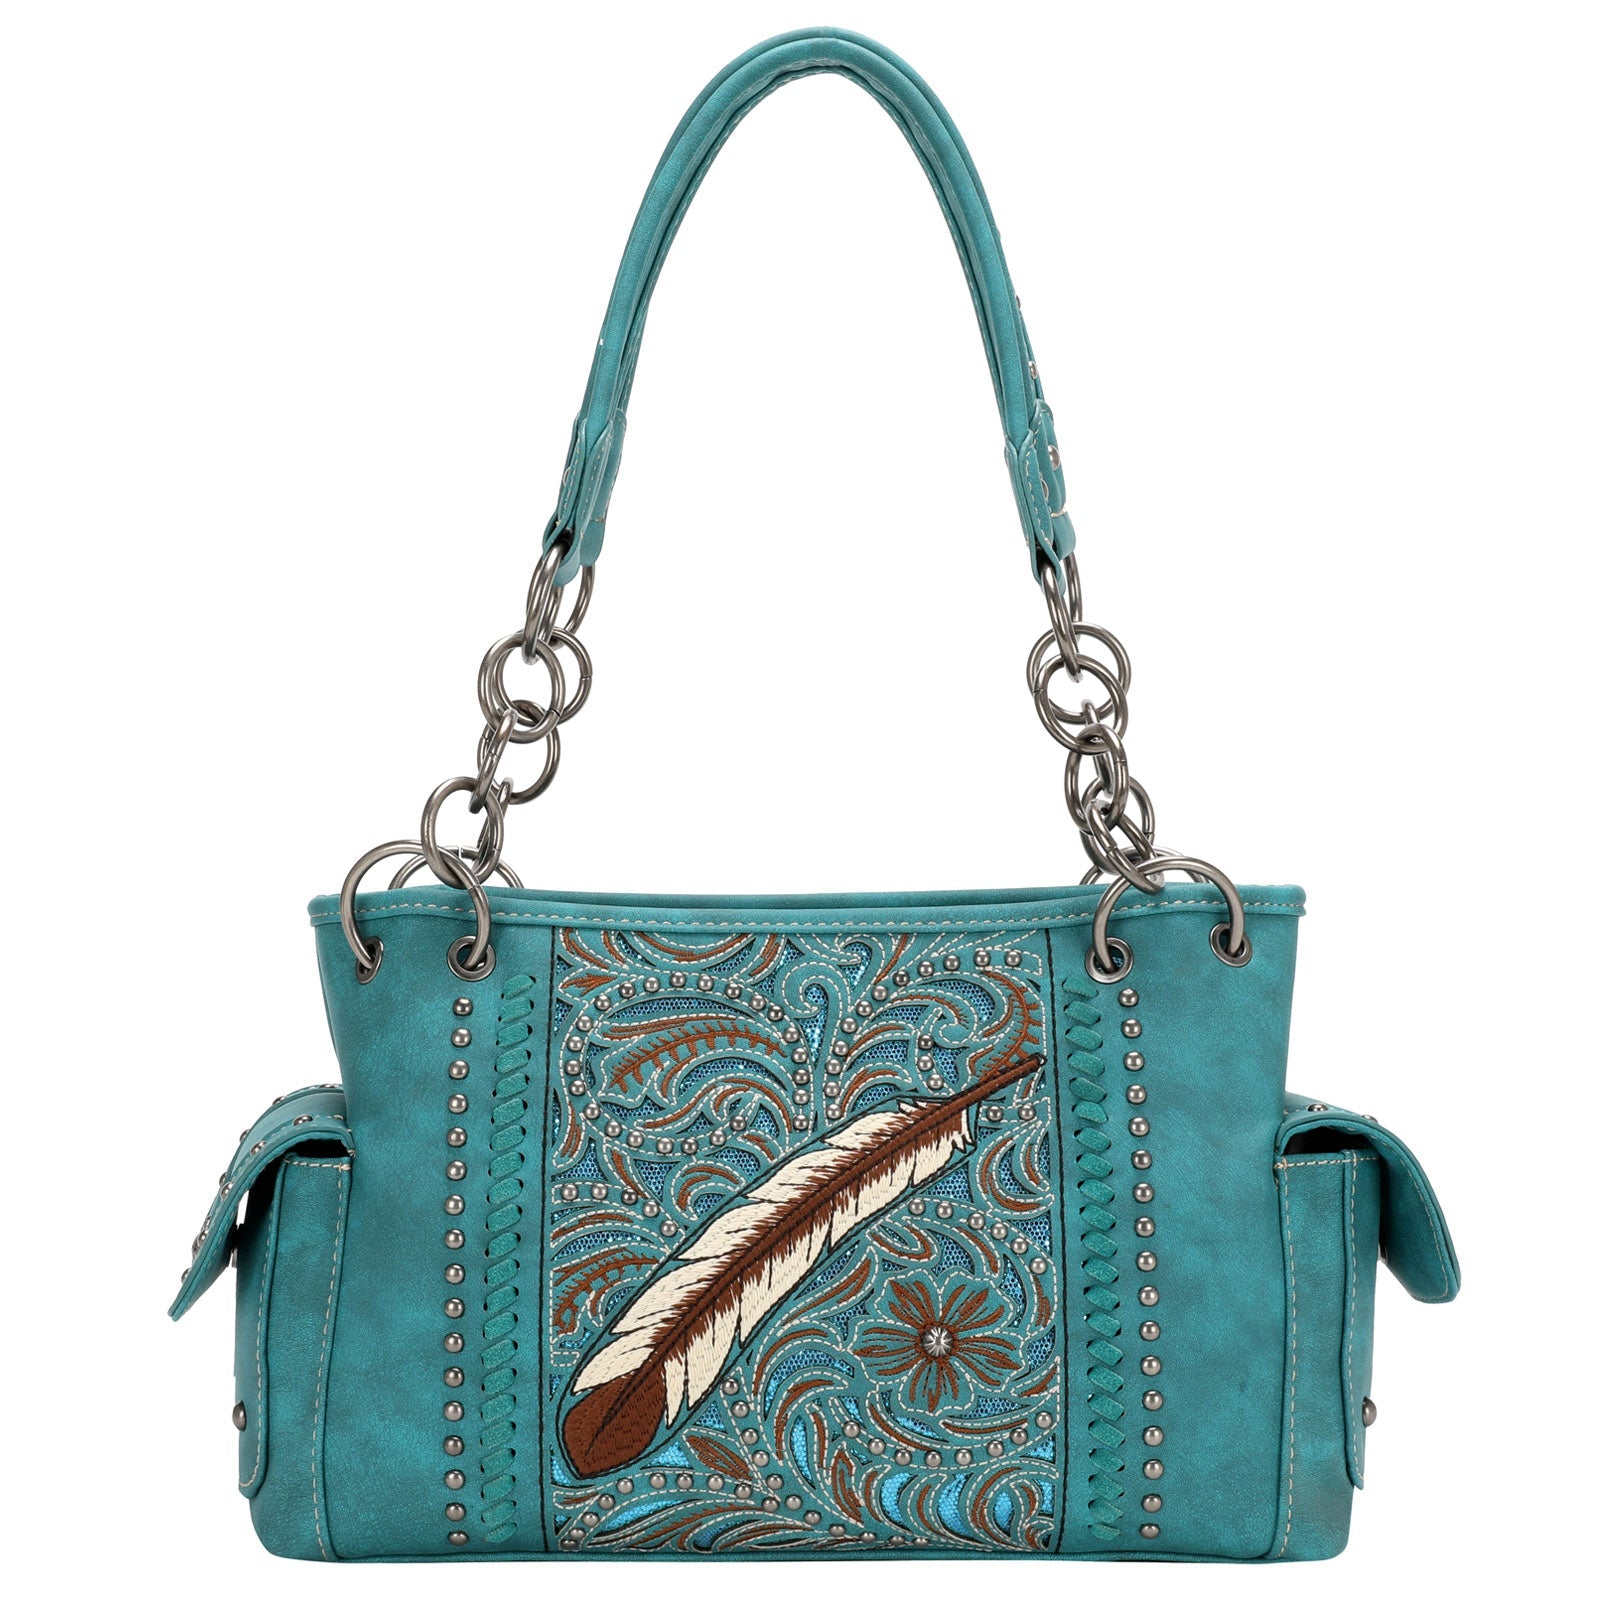 Montana West Embroidered Collection Concealed Carry Satchel - Cowgirl Wear